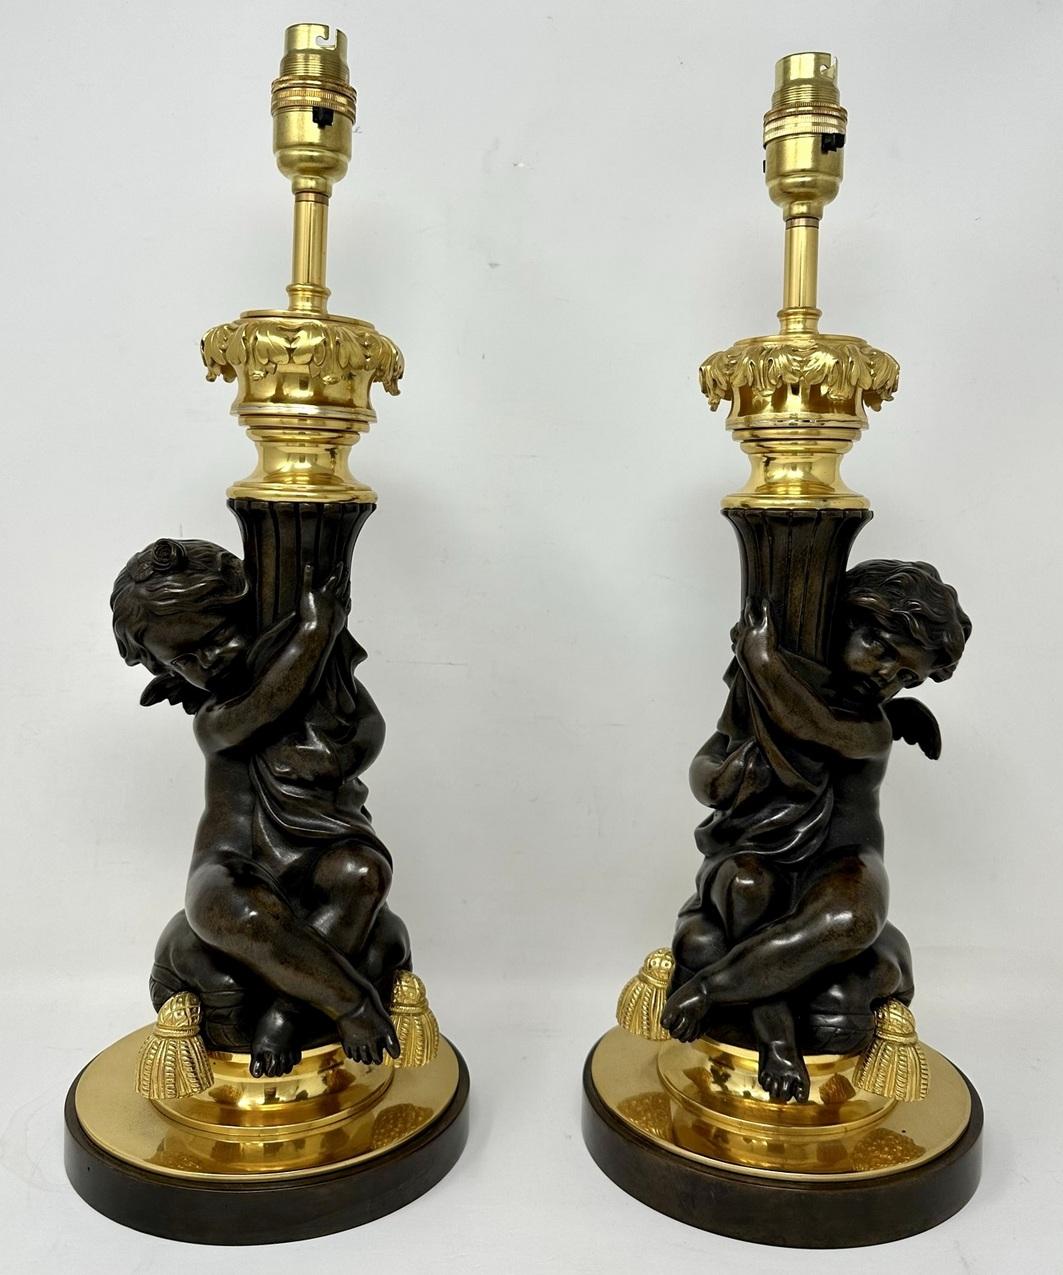 A very fine quality pair of French Louis XV inspired Chisel cast heavy gauge patinated and gilt bronze figural electric table lamps of outstanding quality and good Size proportions depicting Winged Cherub seated on a tasseled pillow holding a